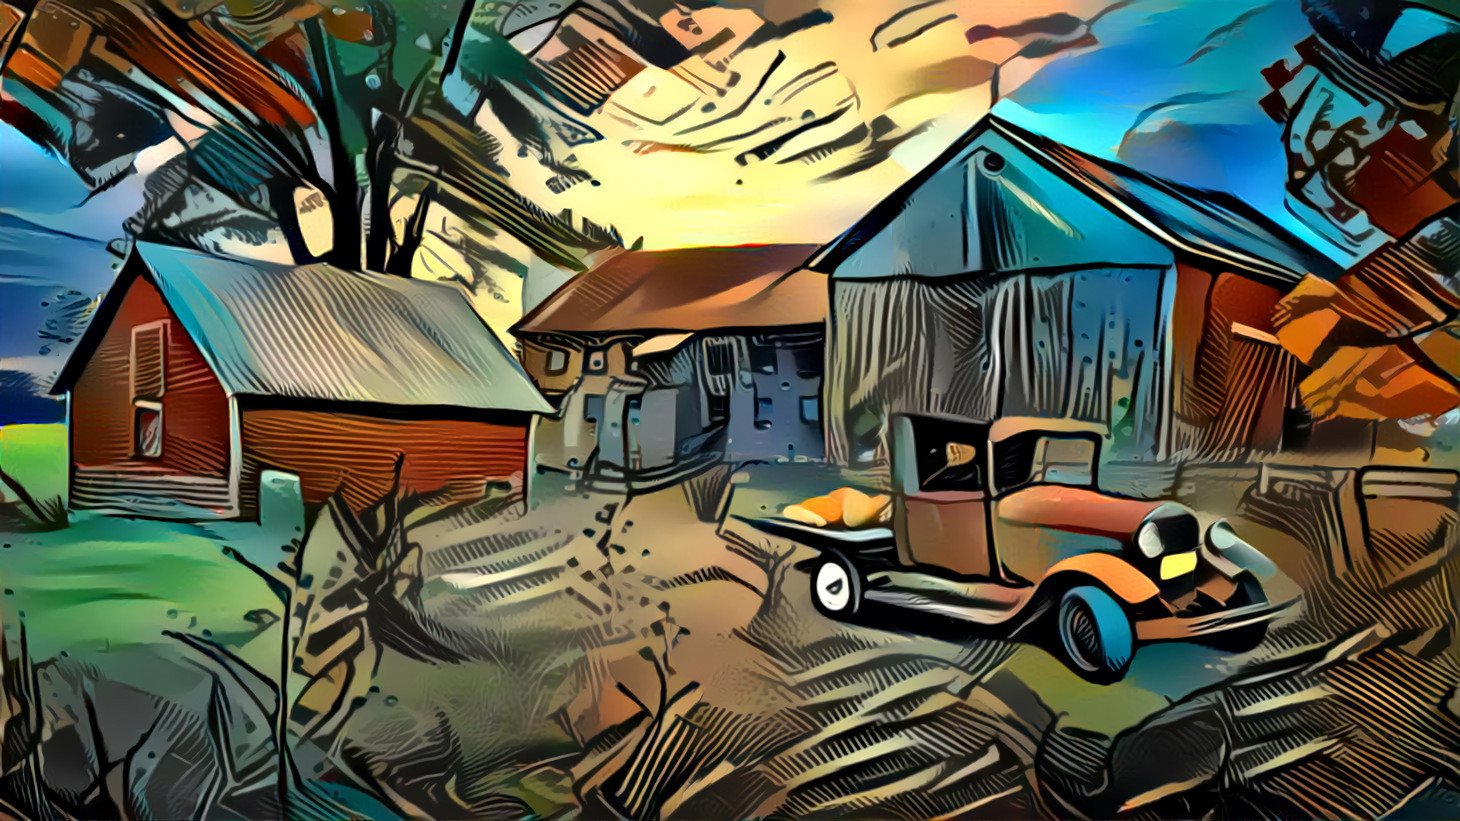 Old Truck and Barns